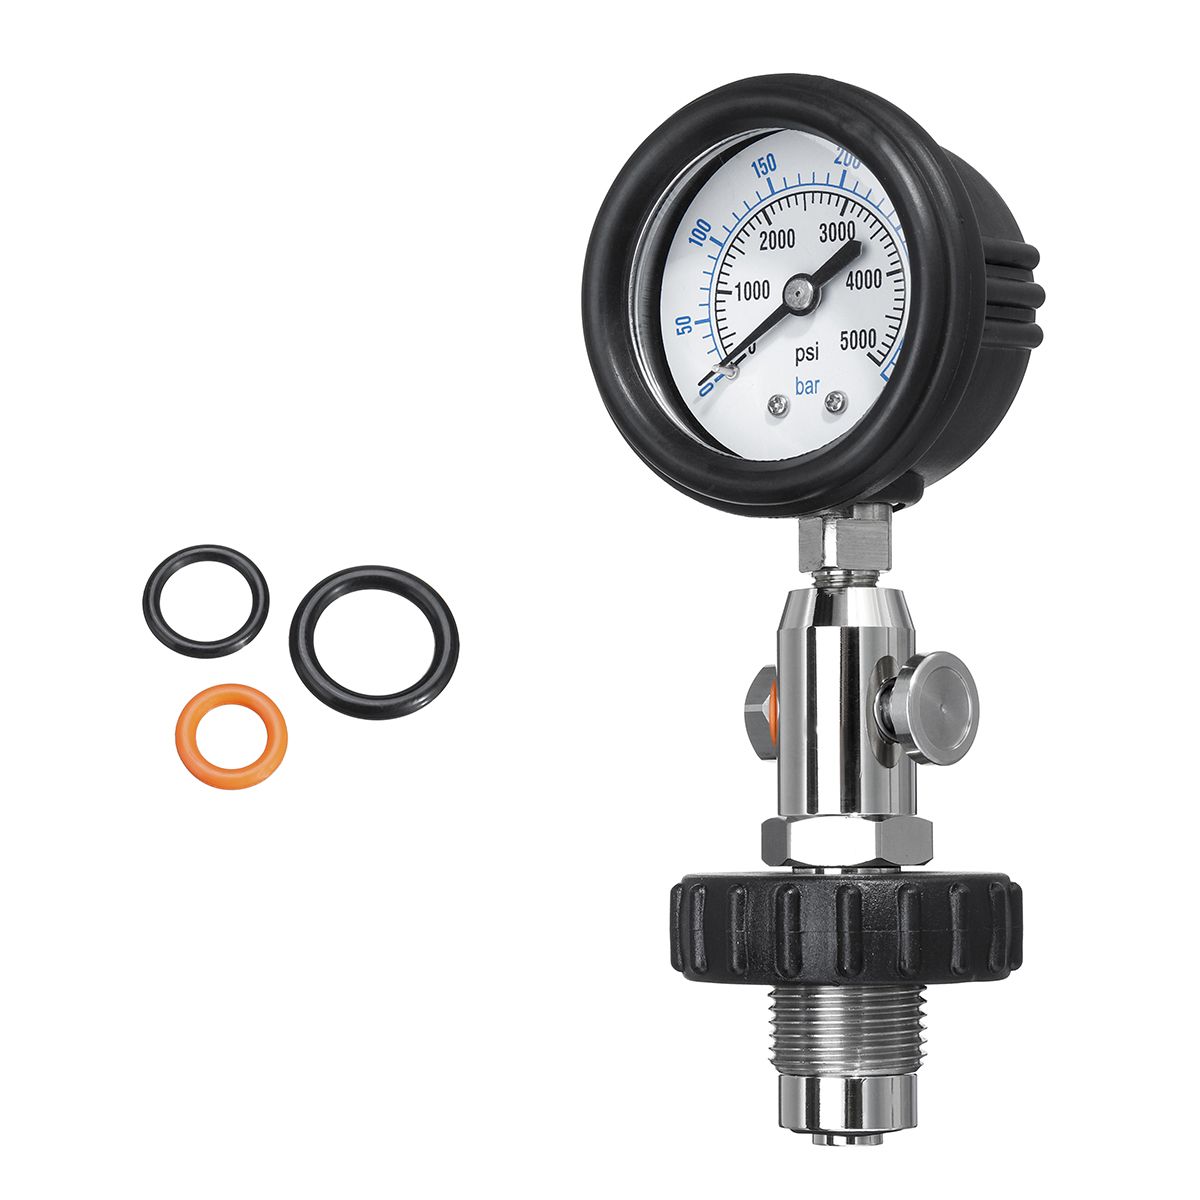 350-BAR-Axial-Hydraulic-Pressure-Gauge-Test-40MPa-6000PSI-Stainless-Steel-Indicator-1649890